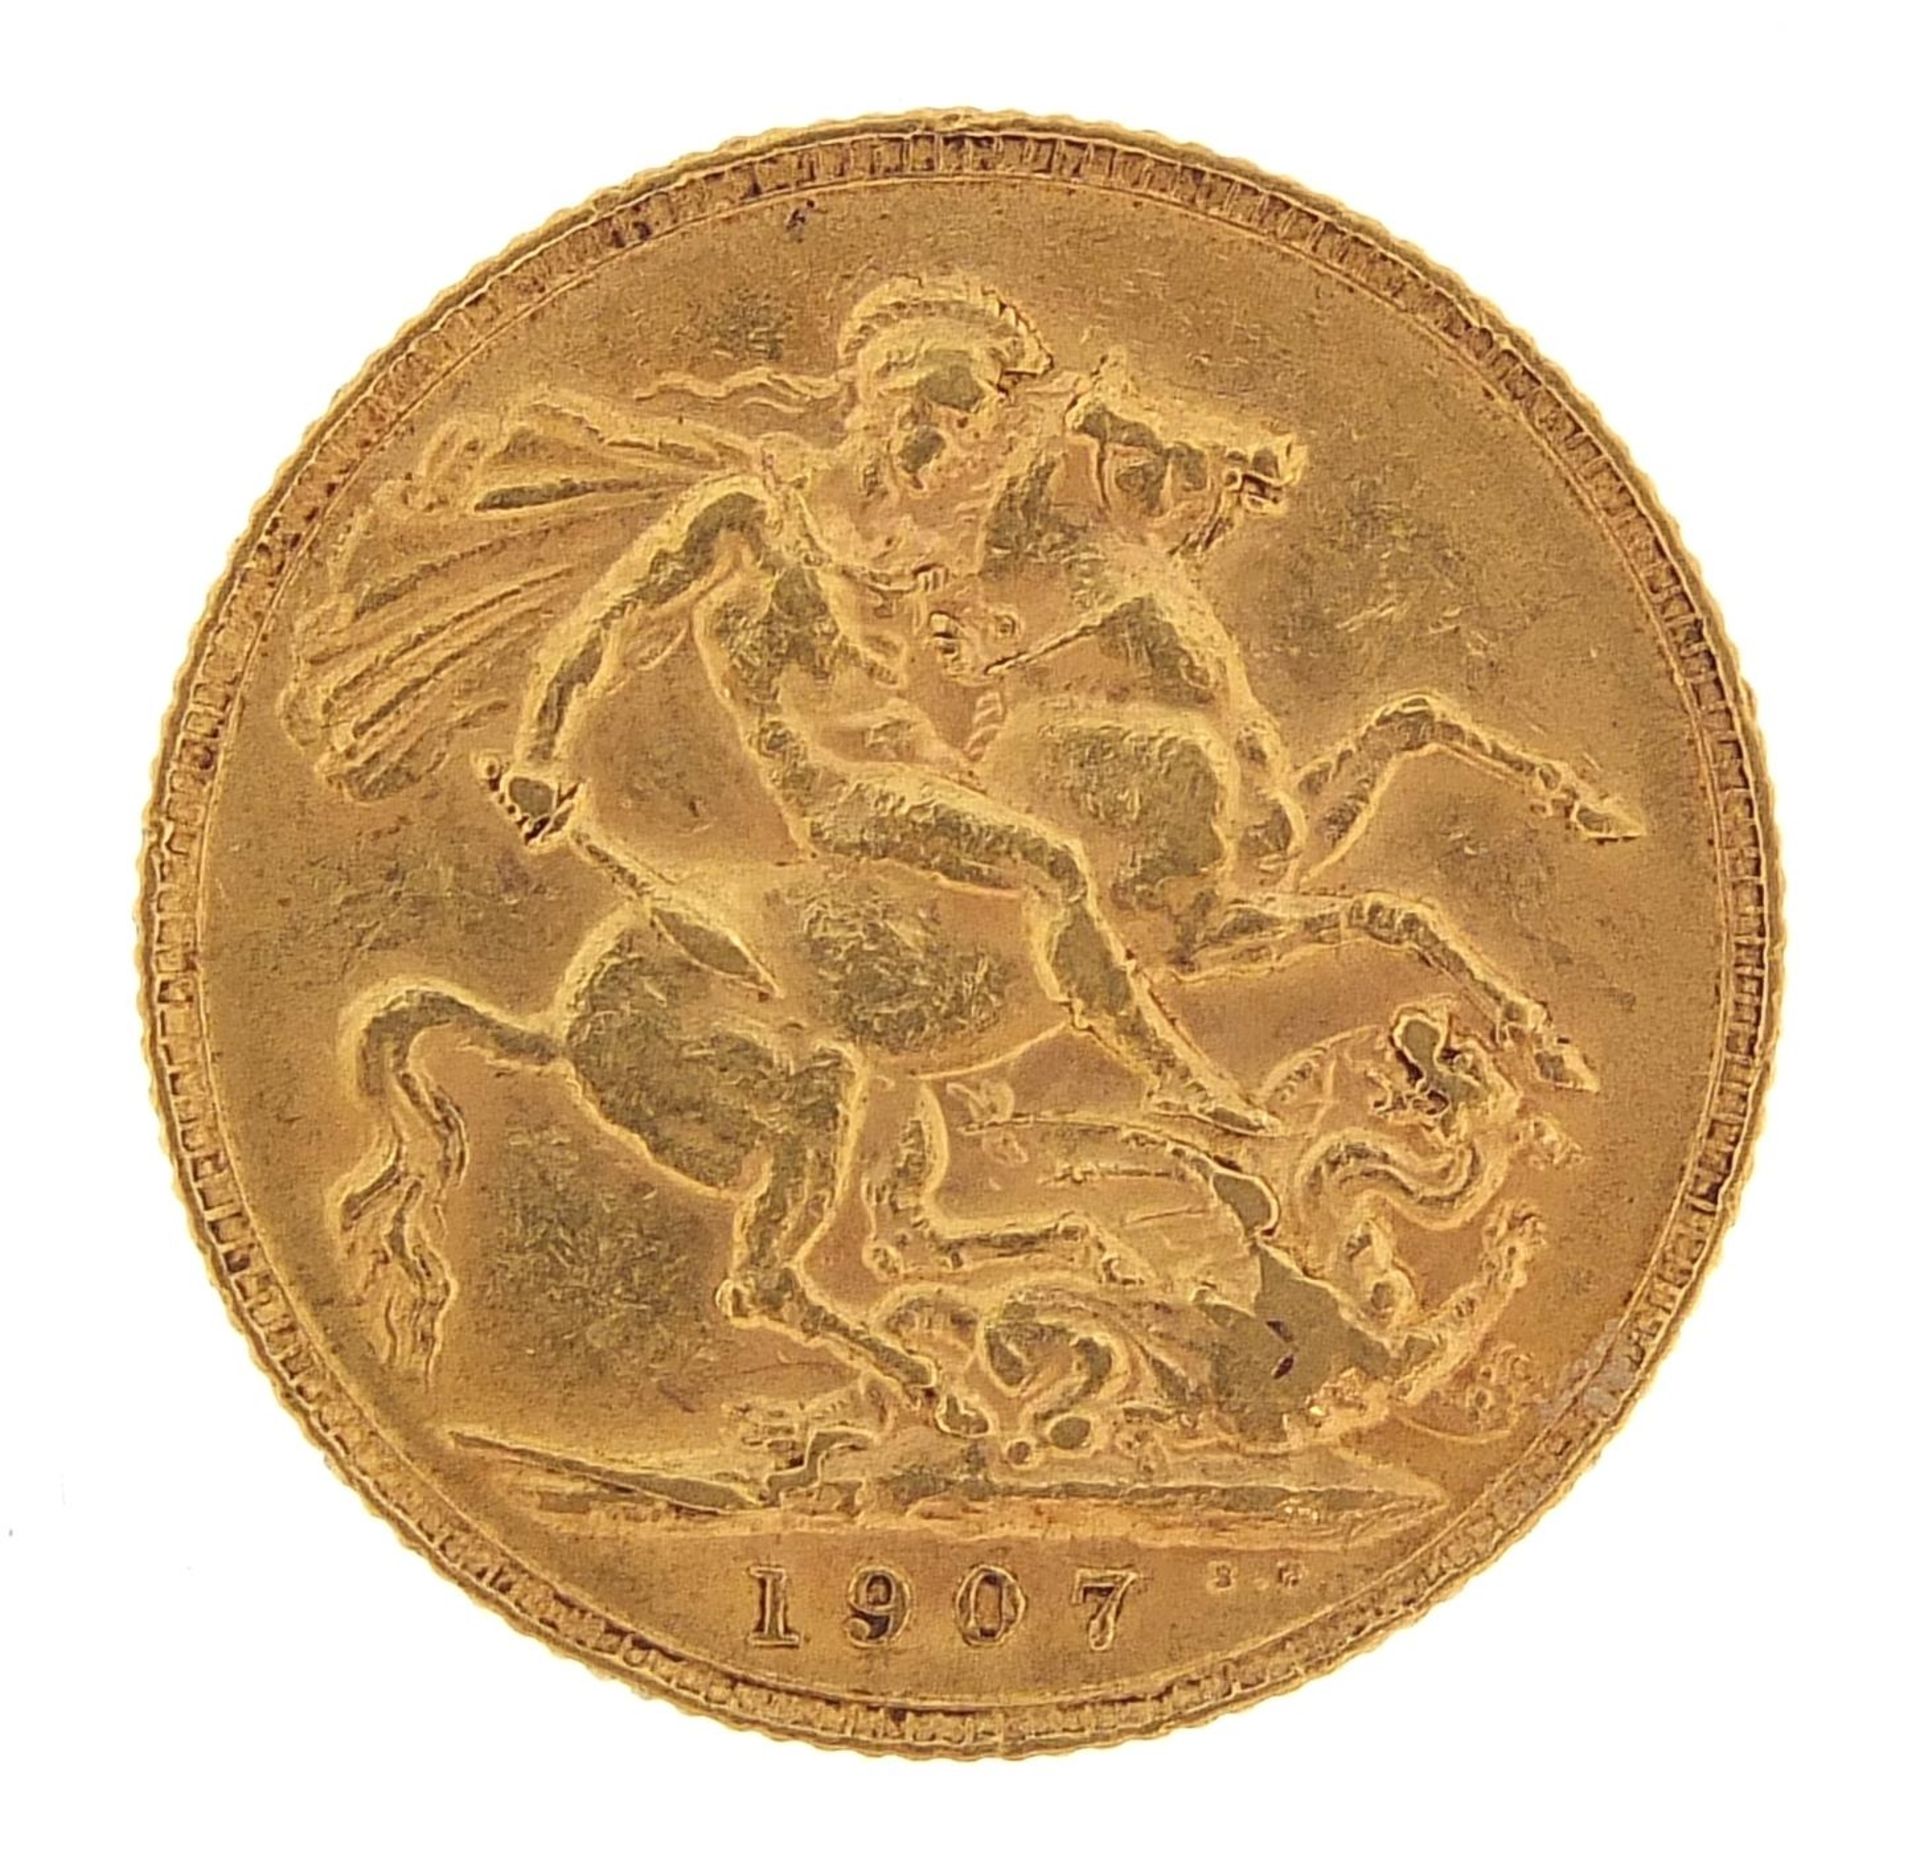 Edward VII 1907 gold sovereign - this lot is sold without buyer's premium